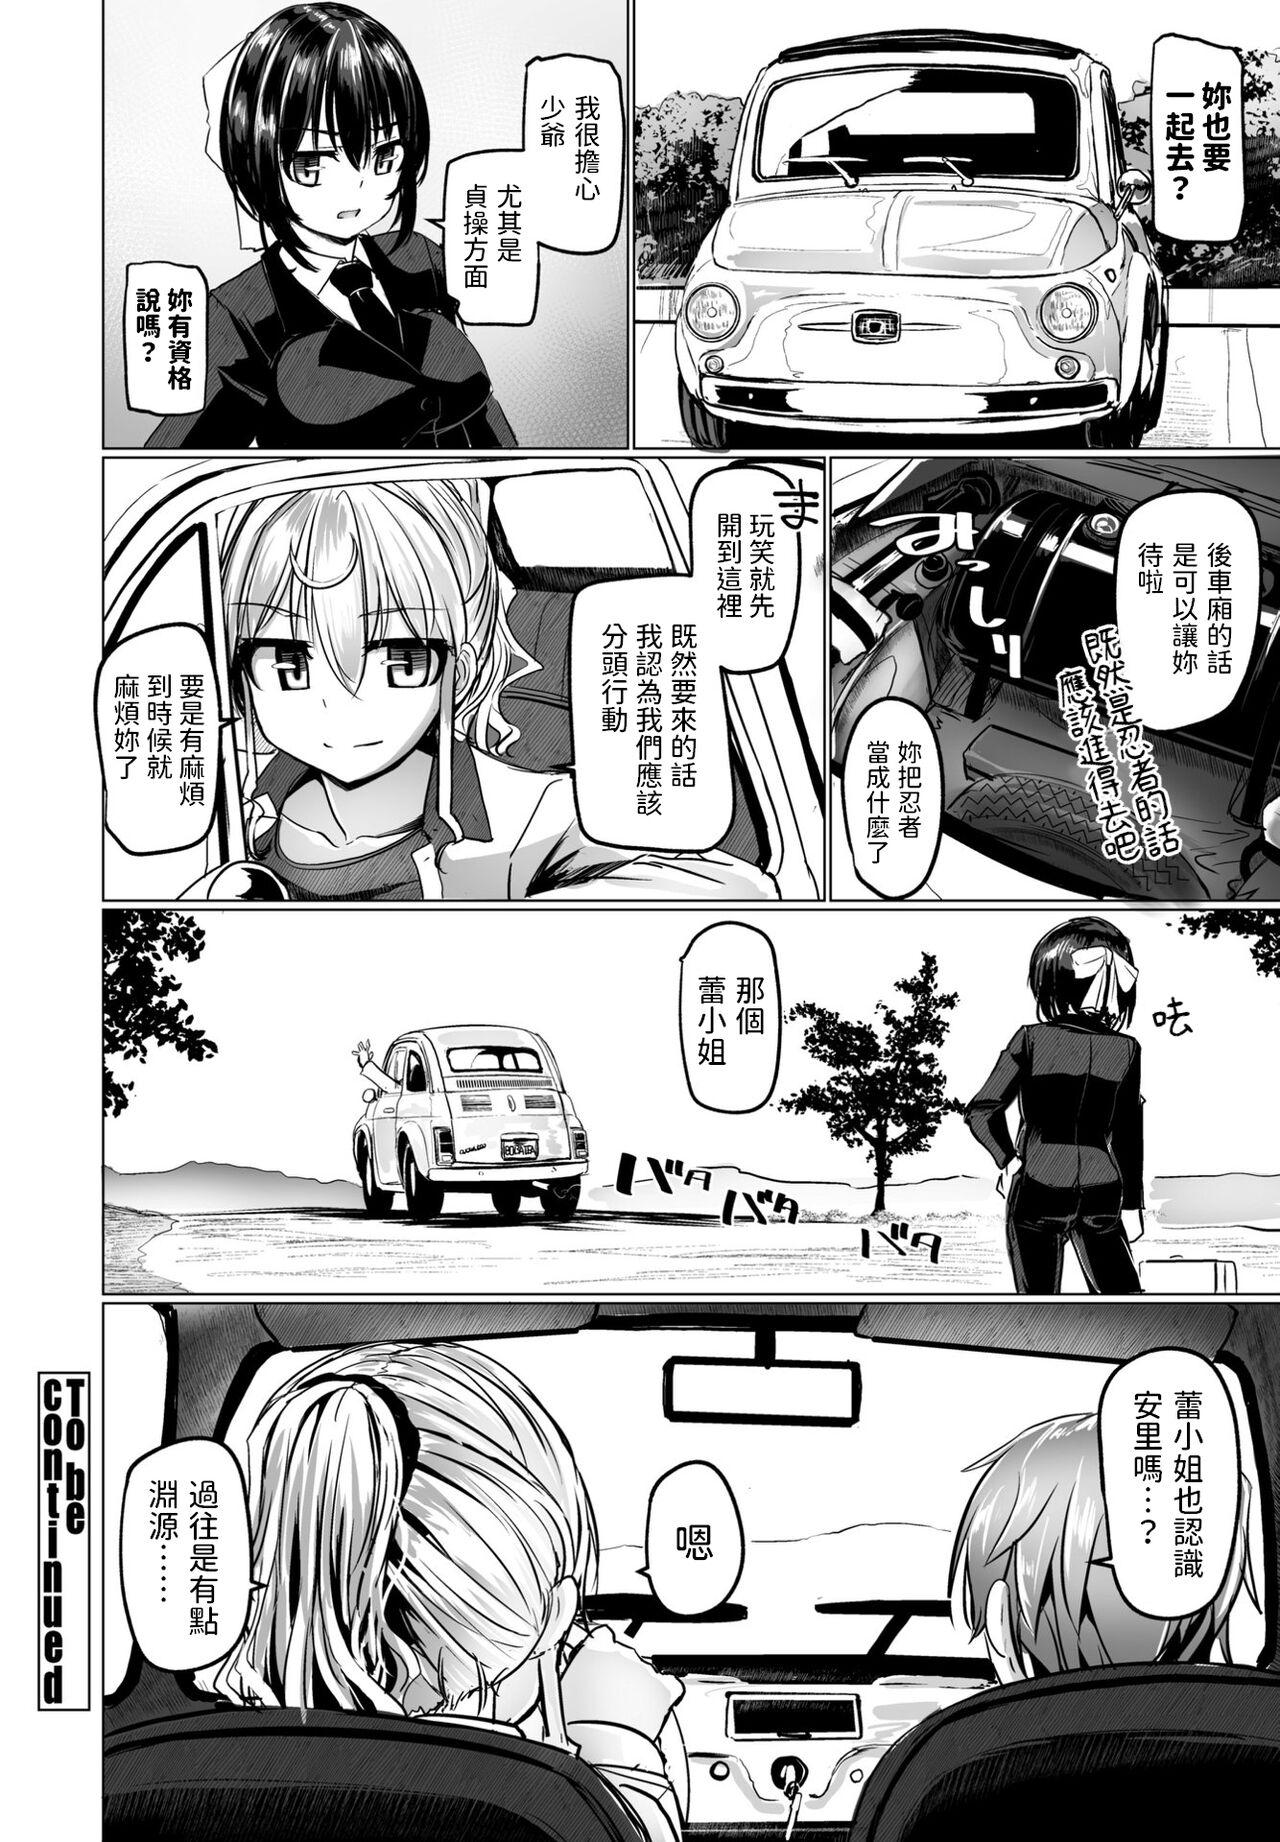 Russia THE NAKASEN DRIVER Ch. 3 Polla - Page 24